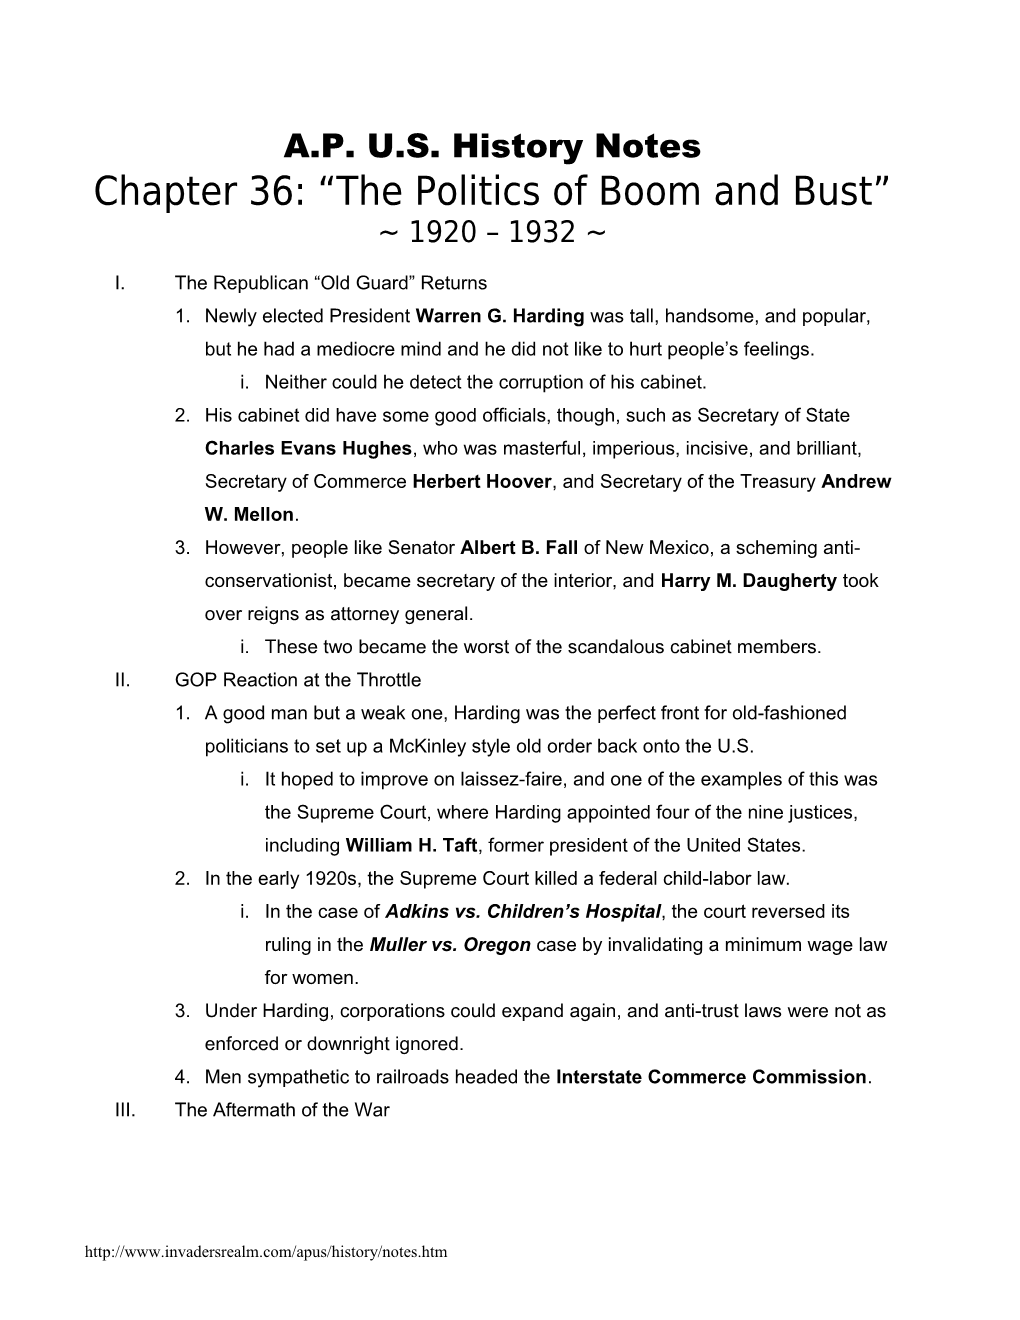 Chapter 36: the Politics of Boom and Bust